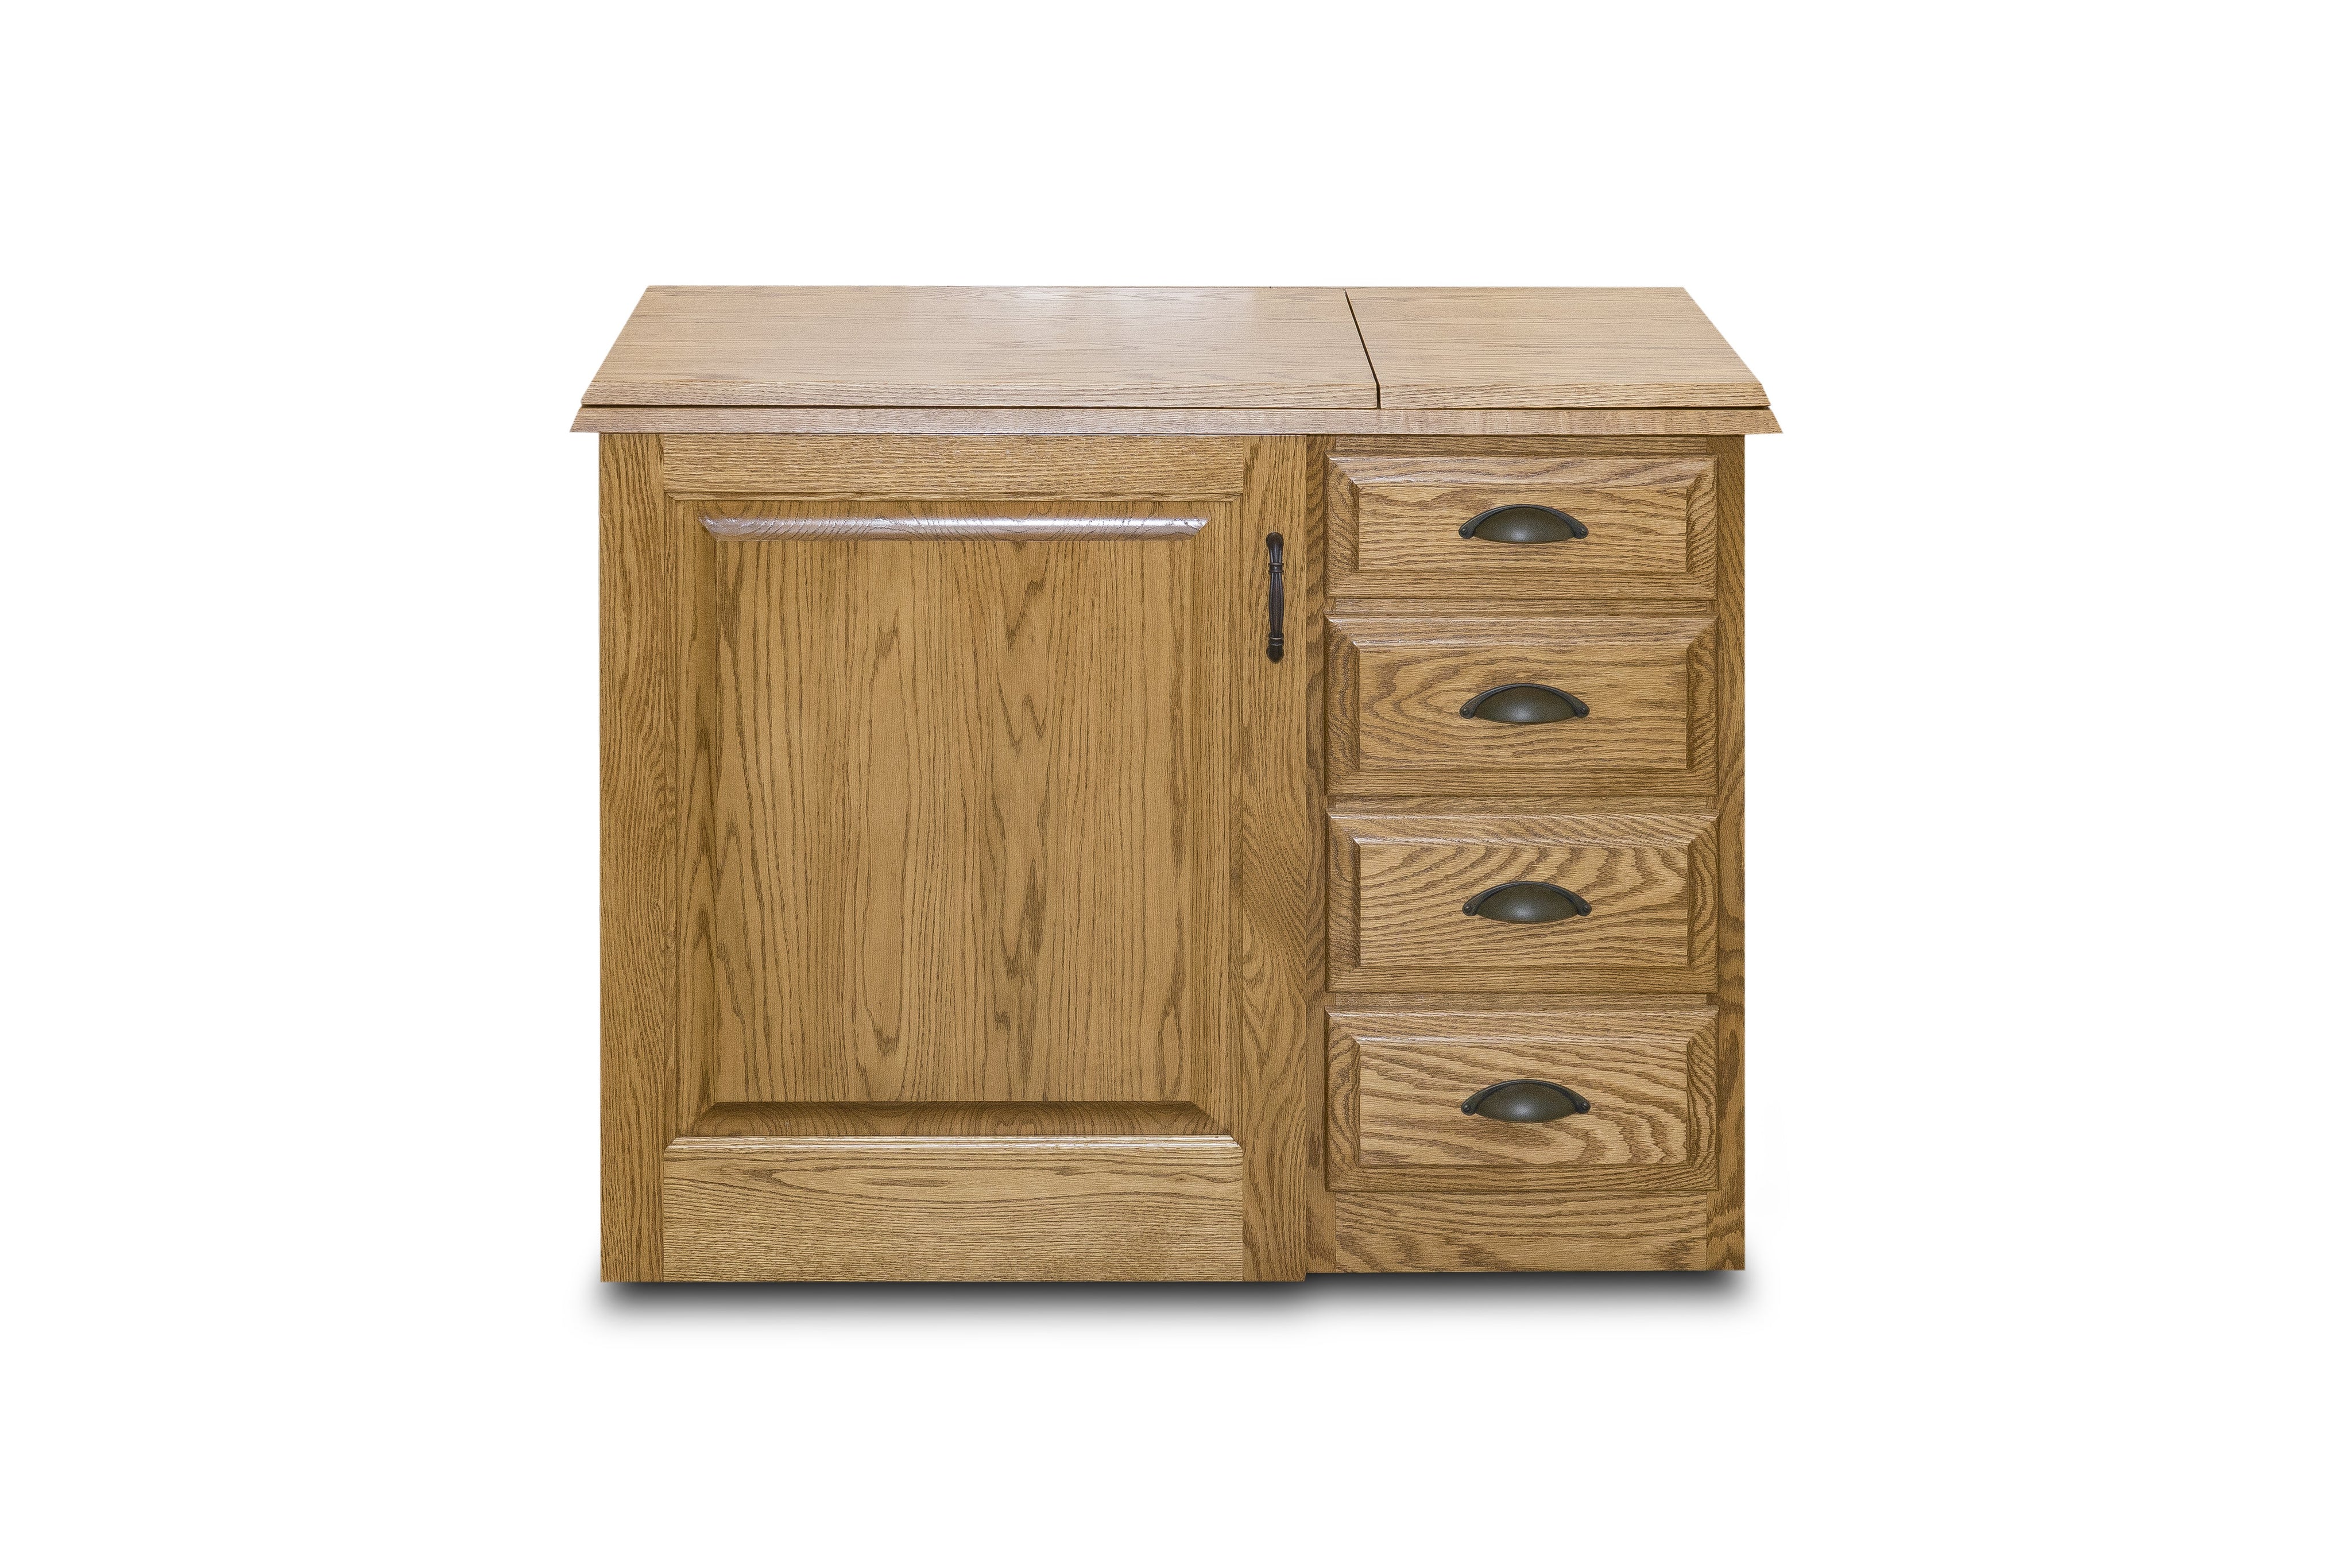 Small Shaker Dressing Table - Solid Wood - Free Curbside Delivery